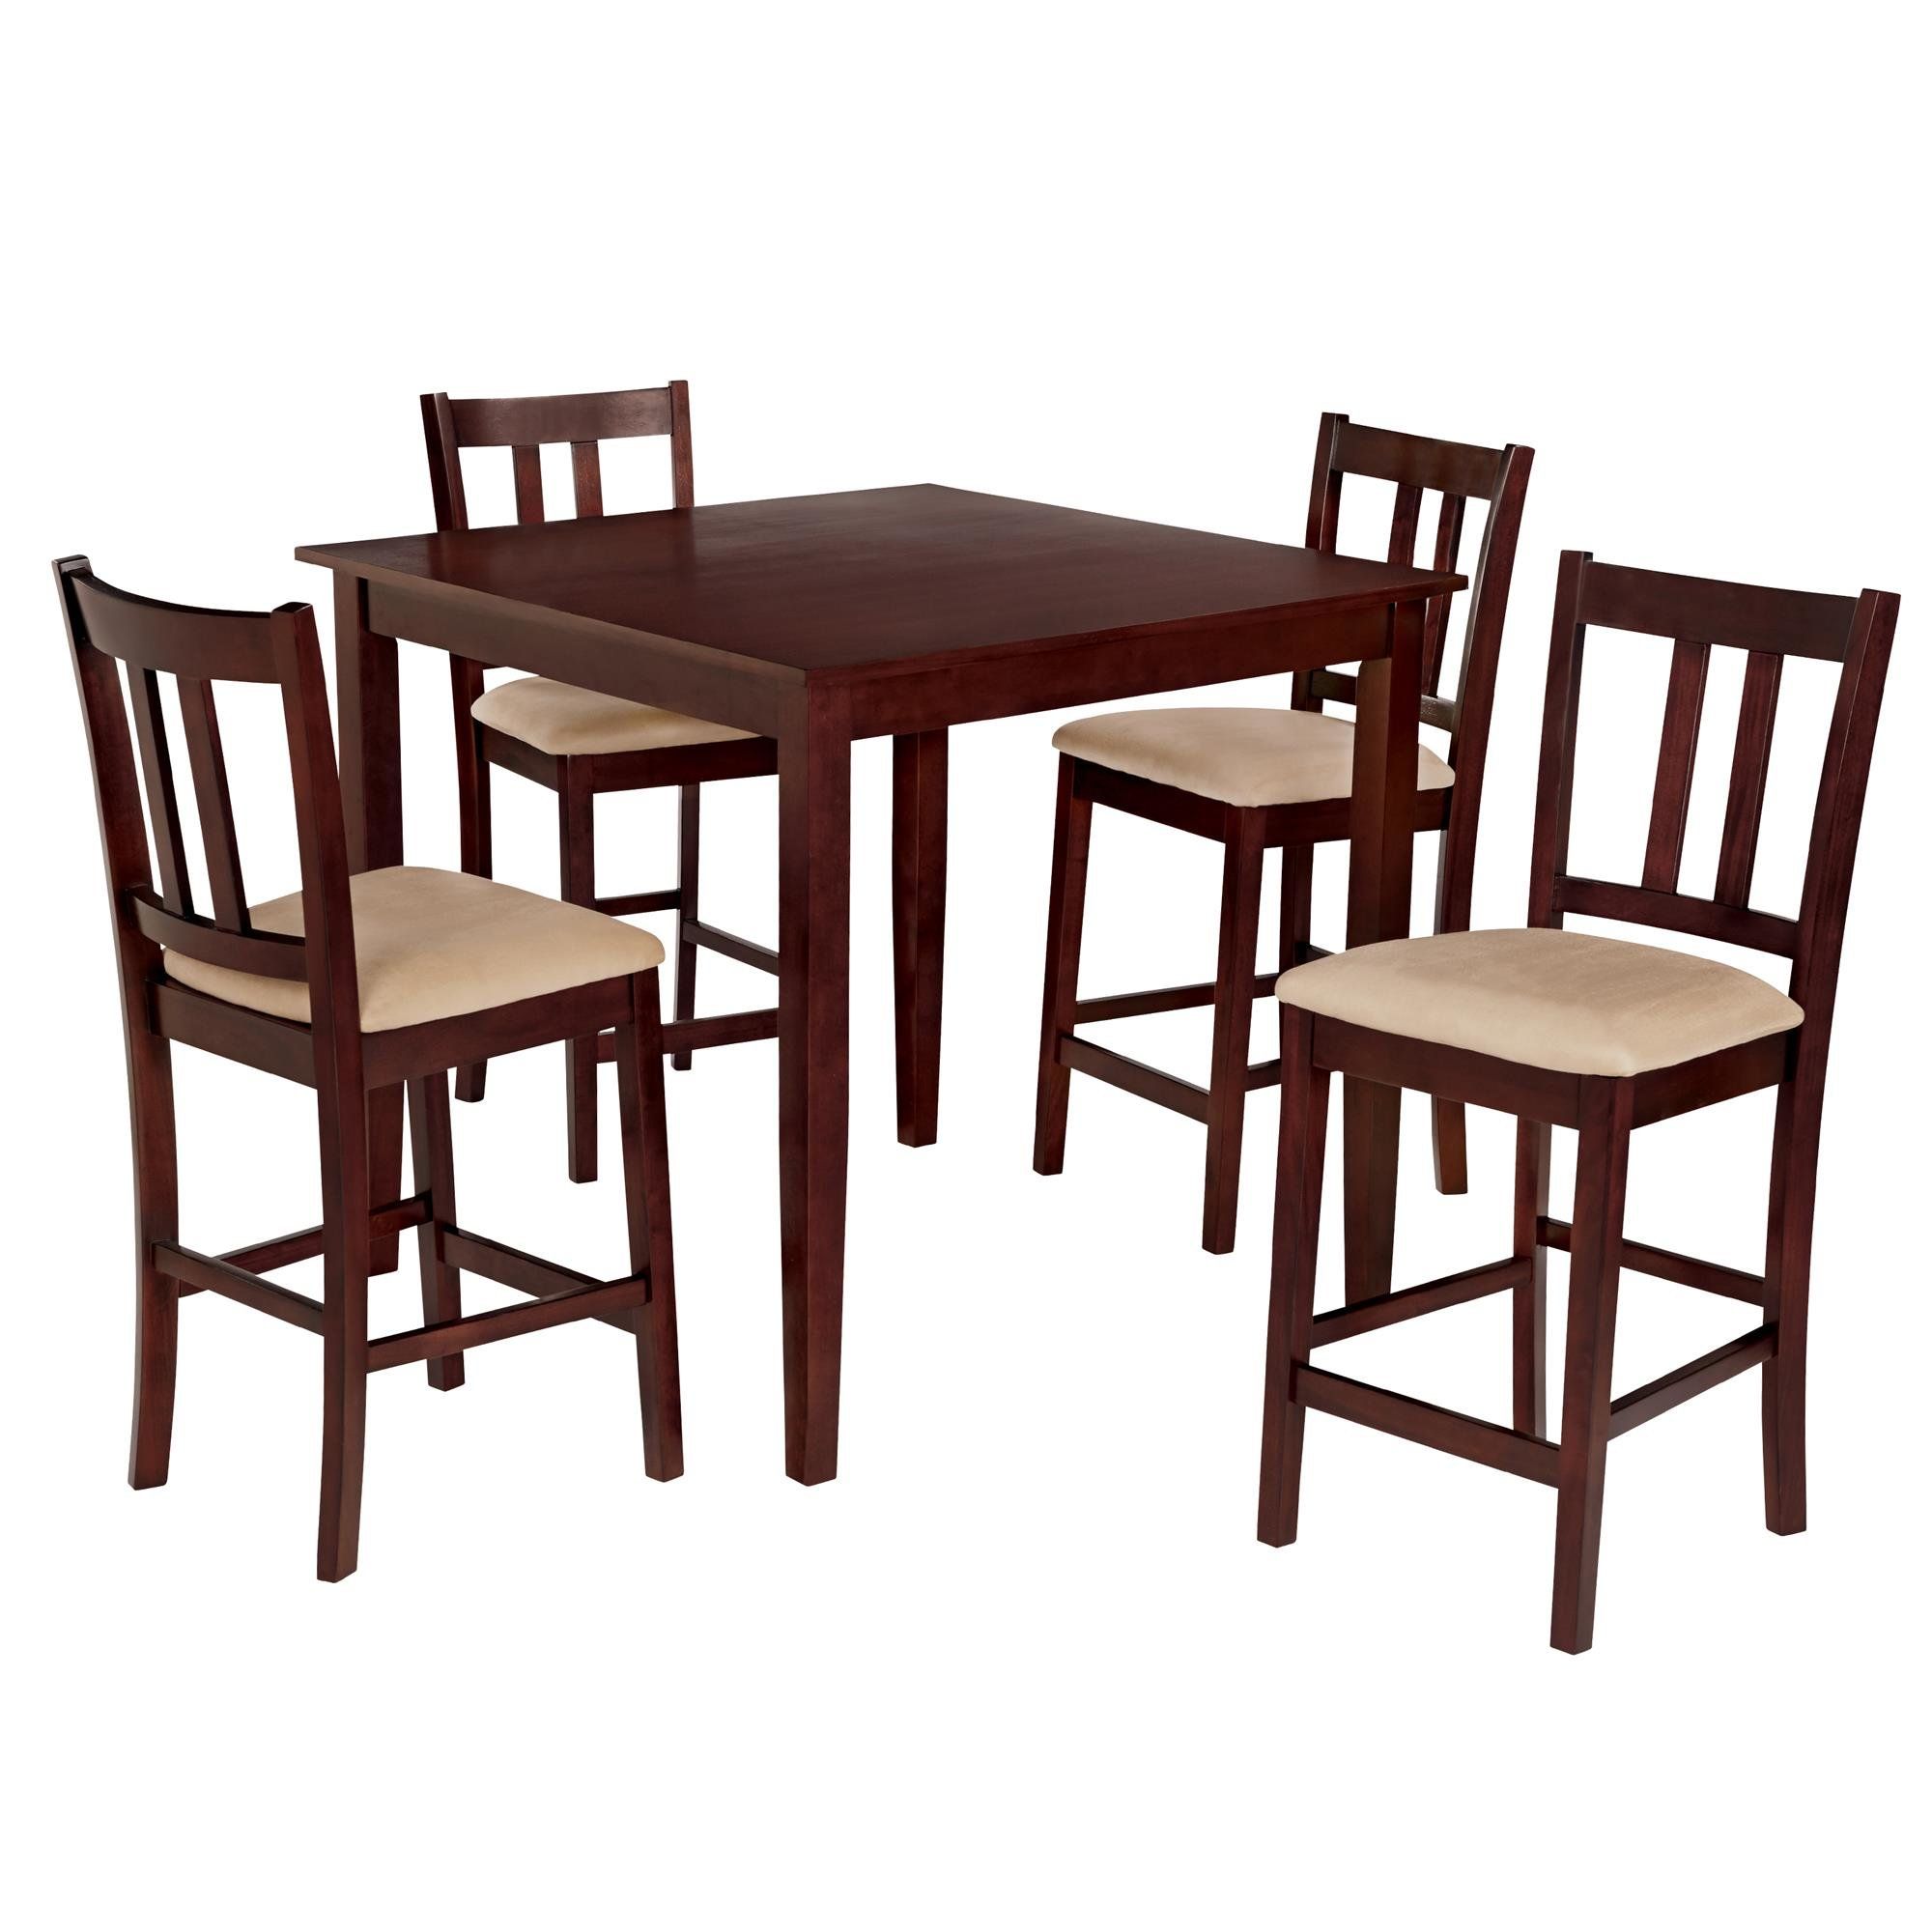 Charlton Home Atterberry 5 Piece Solid Wood Dining Set & Reviews With Most Recent Sundberg 5 Piece Solid Wood Dining Sets (View 2 of 20)